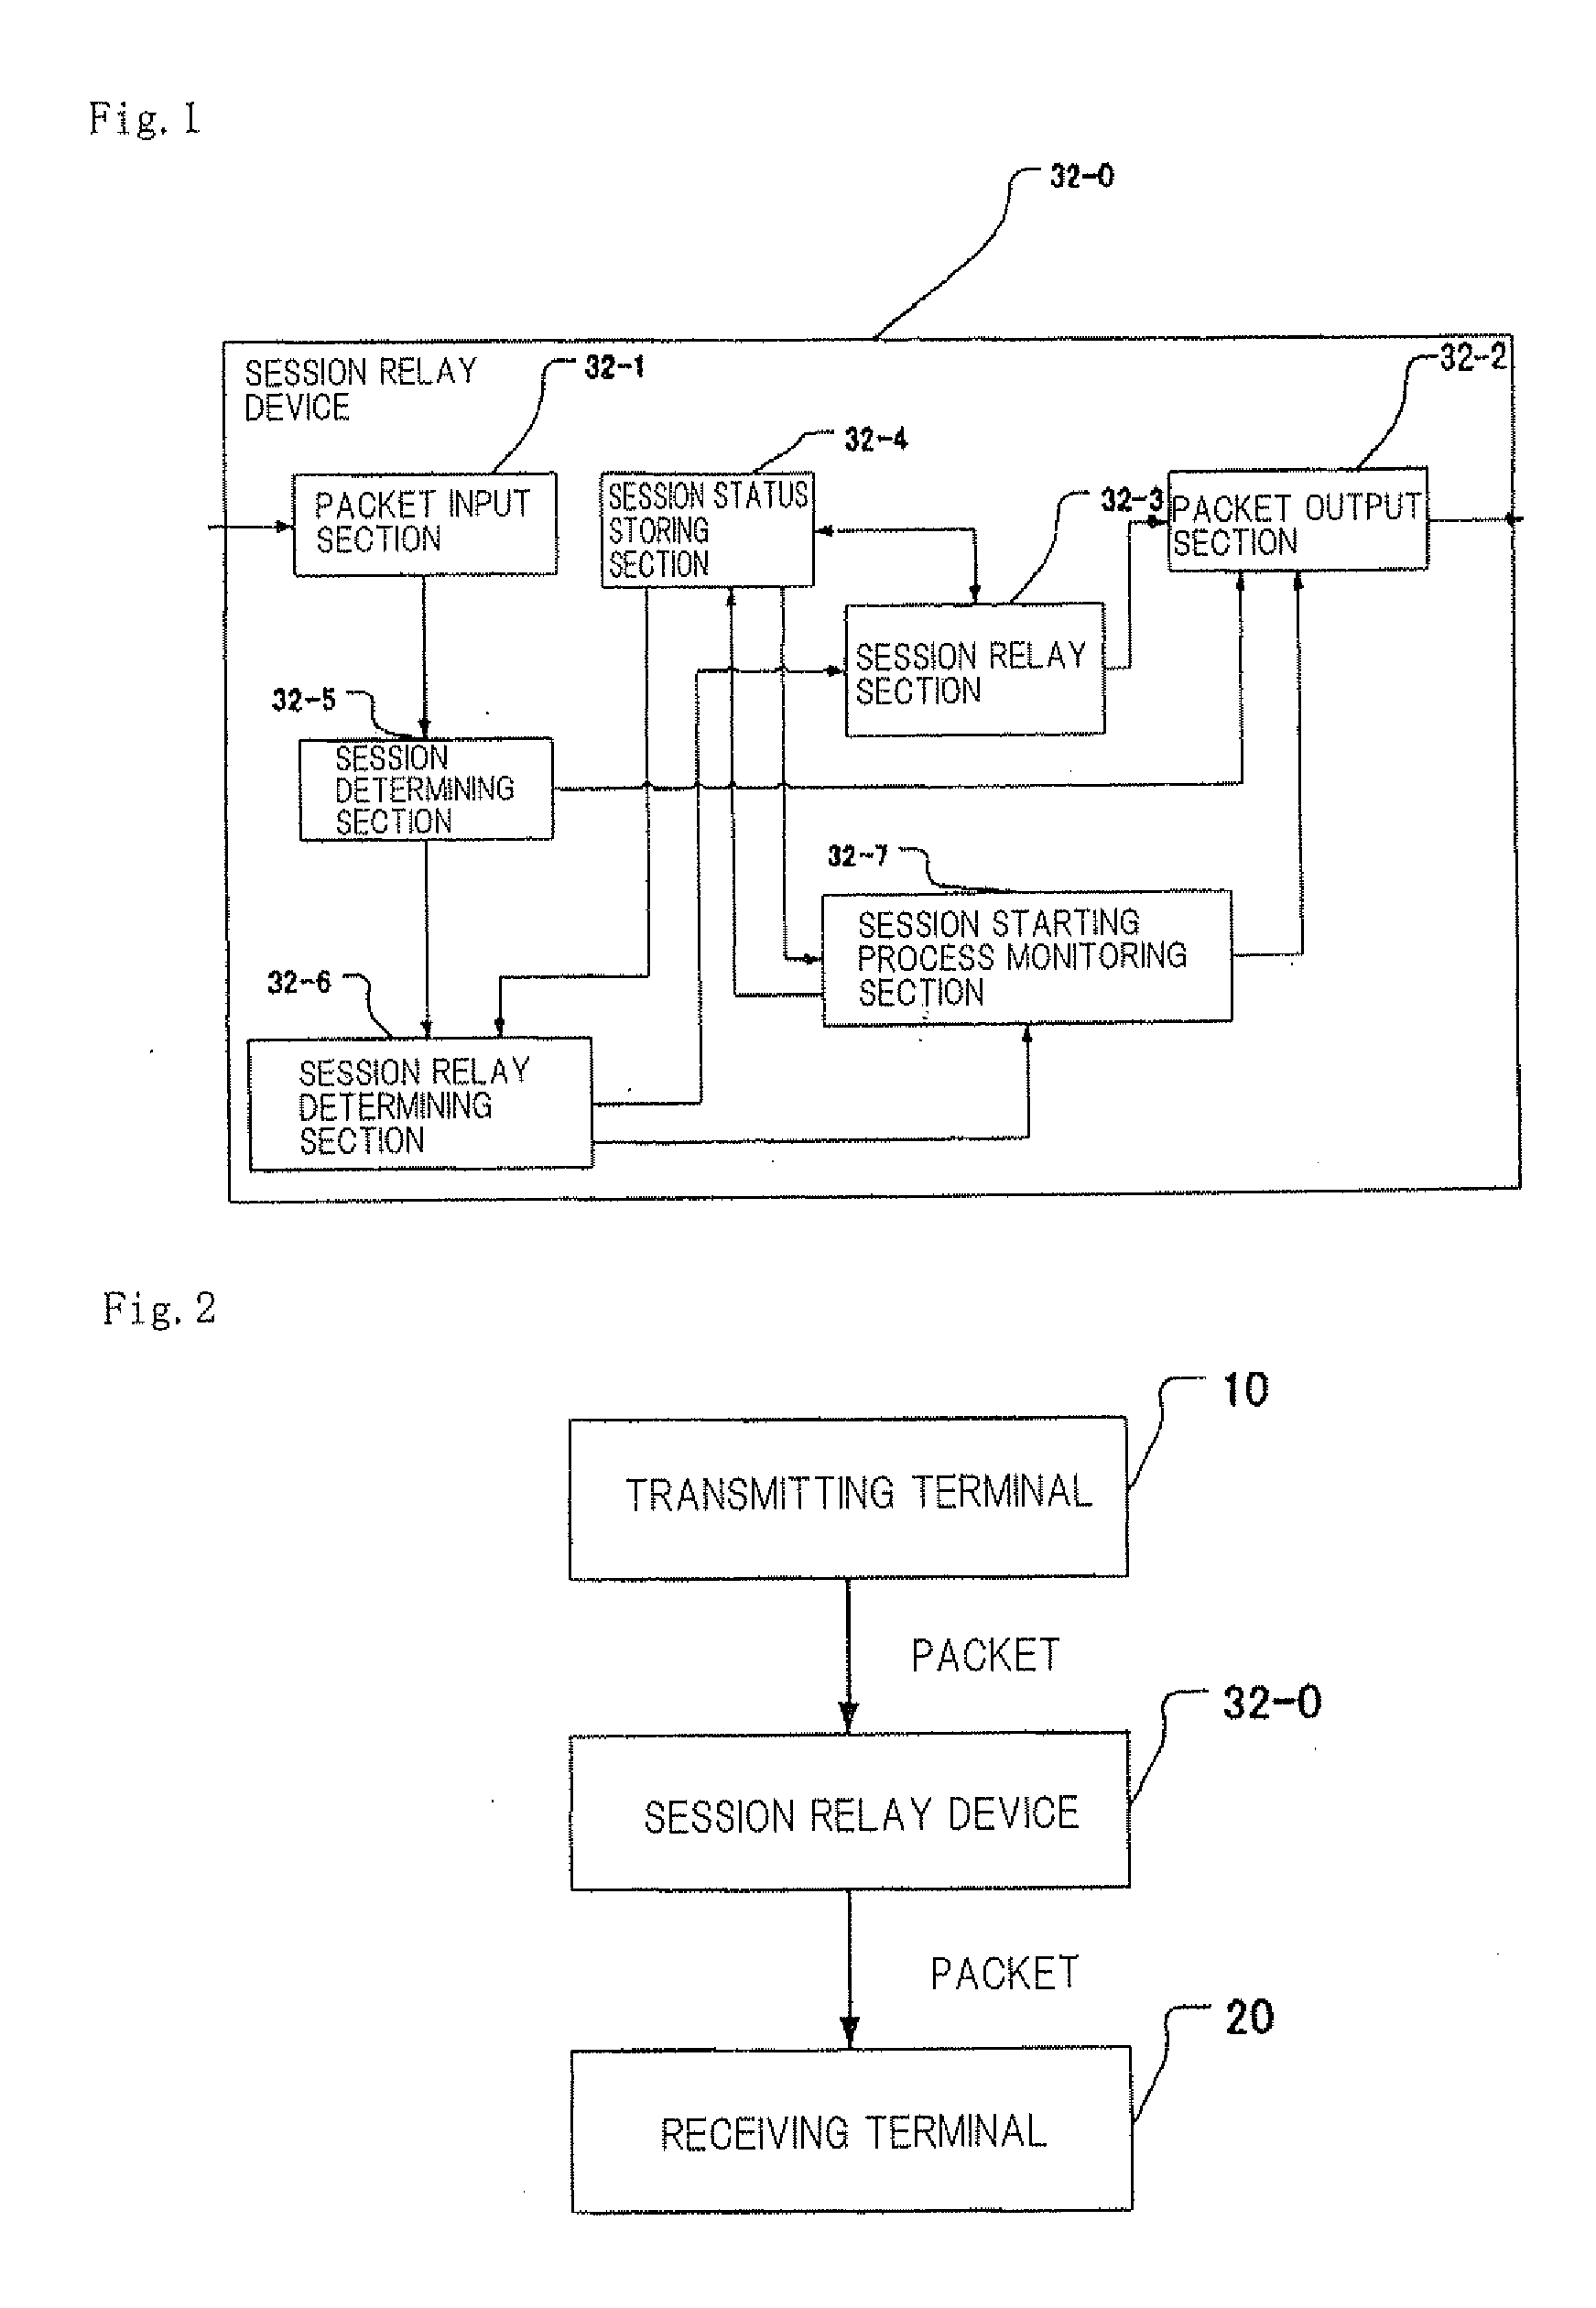 Session relay device and session relay method